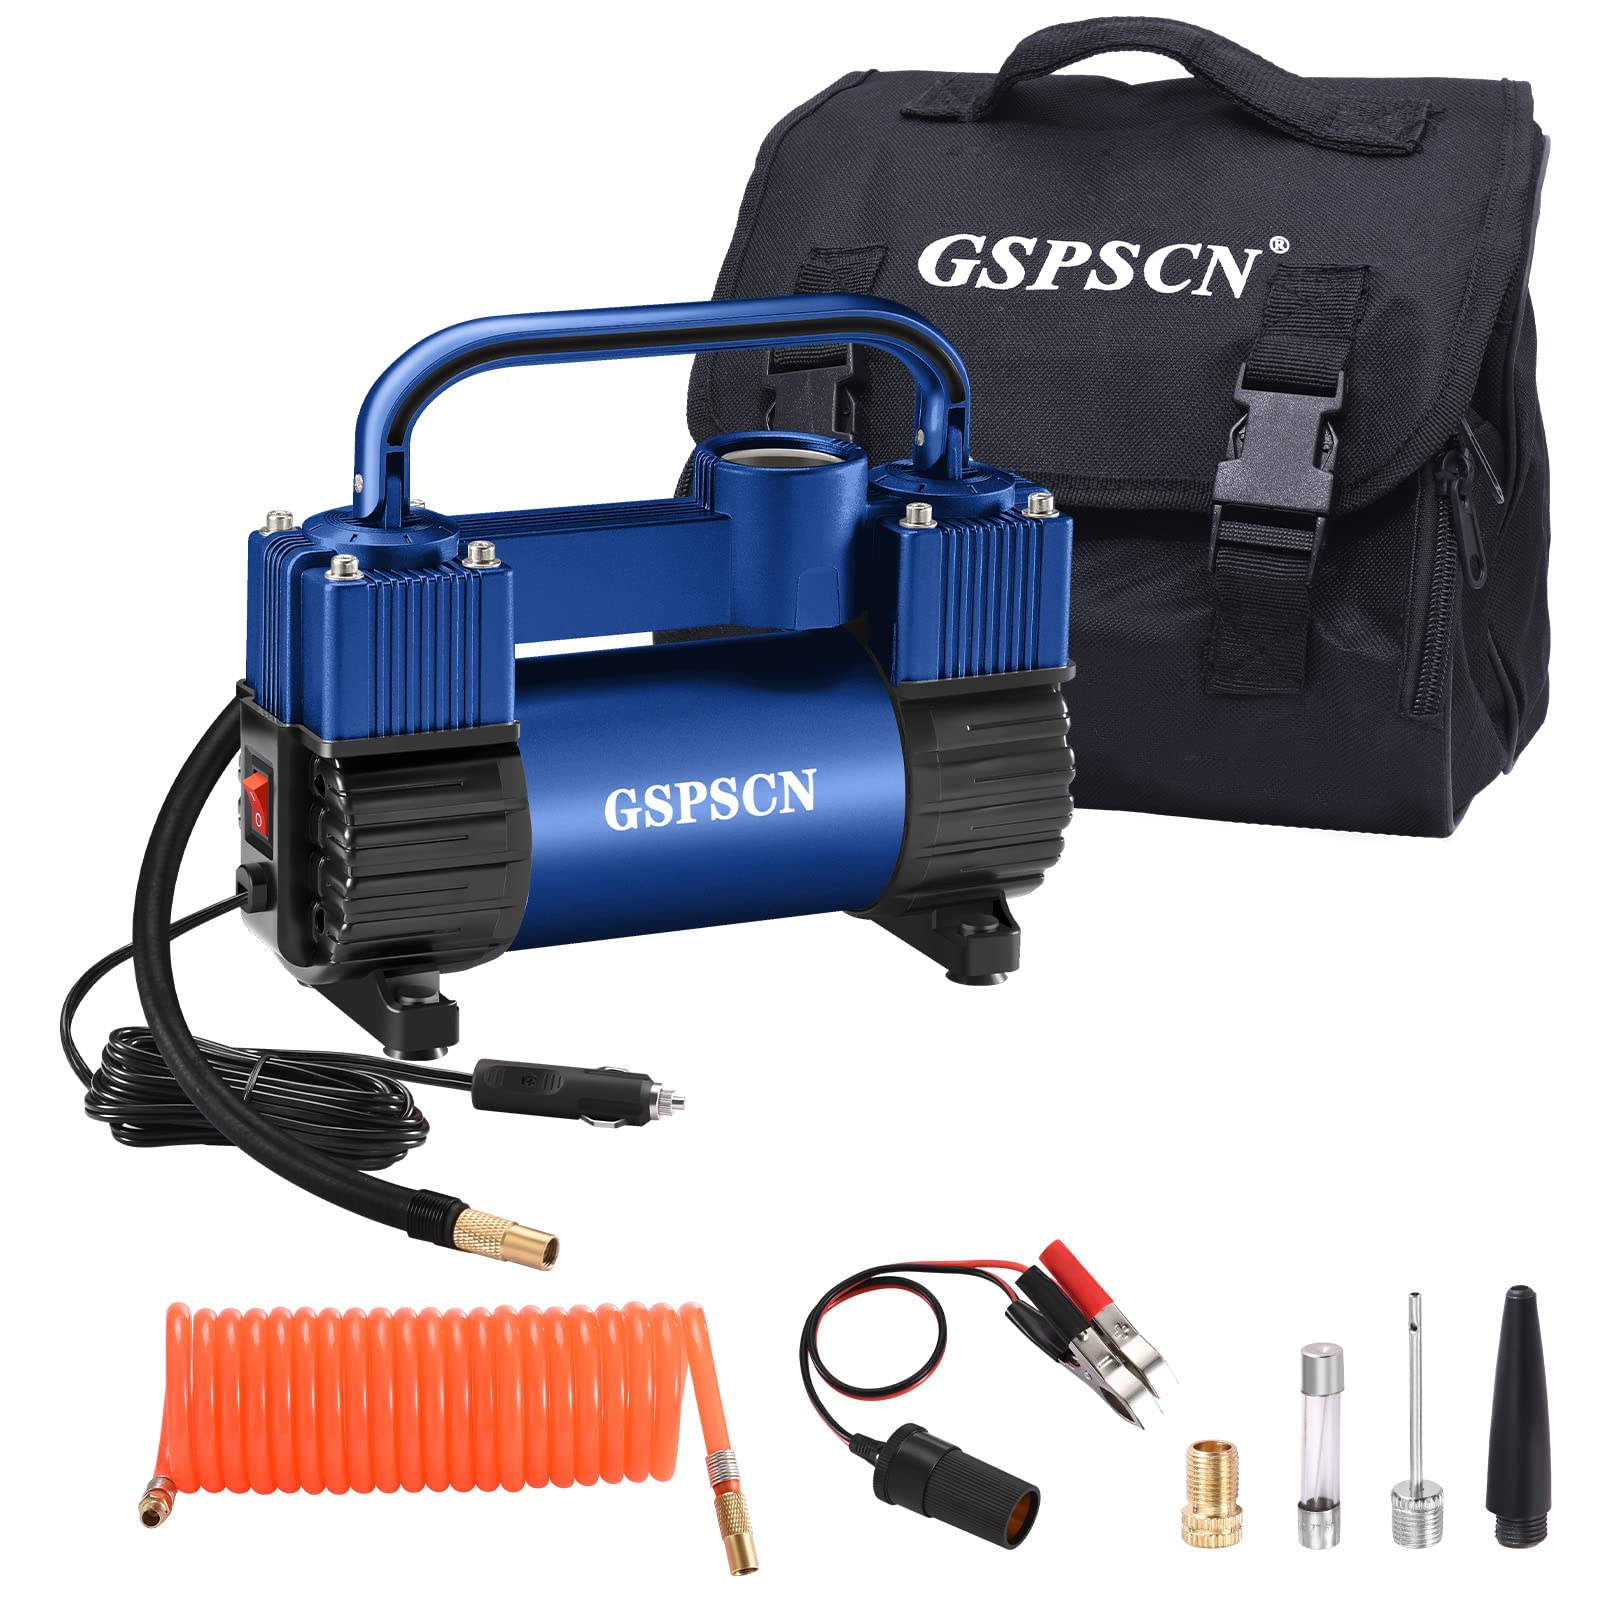 GSPSCN Tire Inflator Heavy Duty Double Cylinders, Portable Metal DC 12V Air Compressor, 150PSI Tire Pump with Adapter for Car, Truck, SUV Tires, Dinghy, Air Bed etc